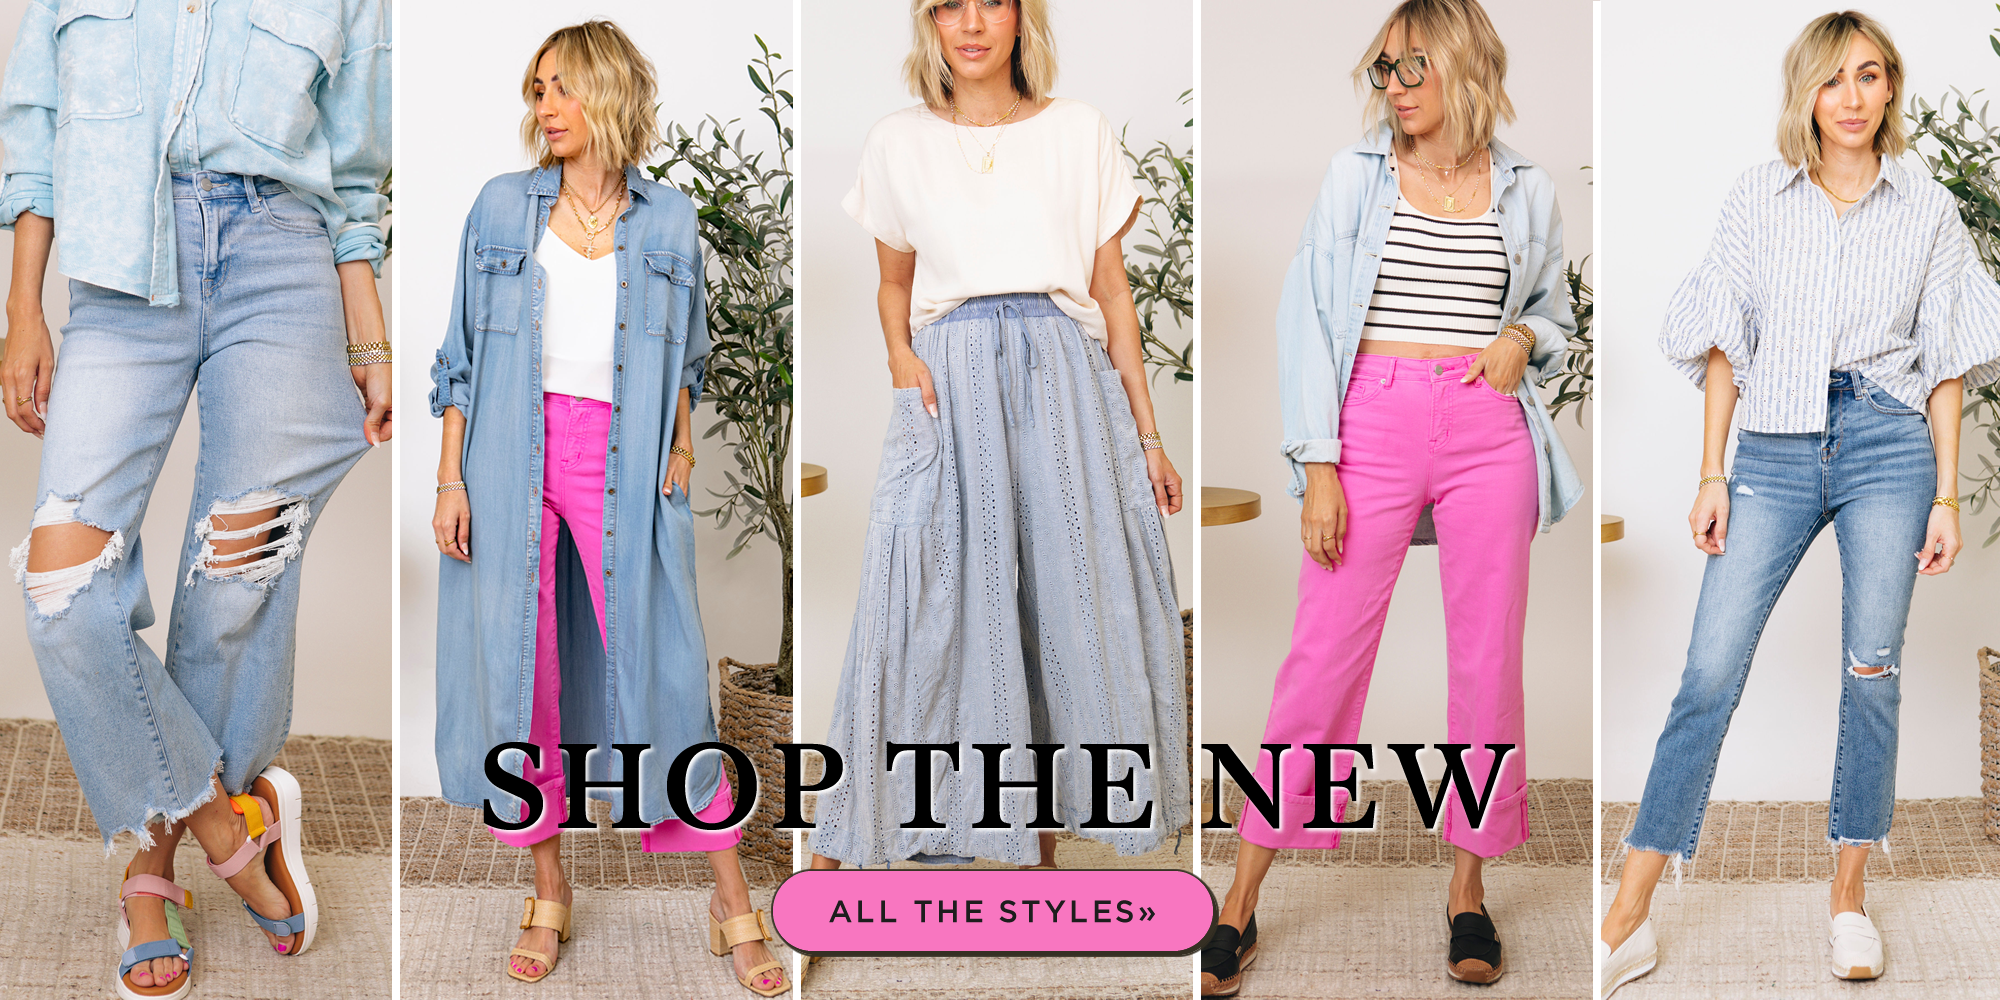 Shop the Look - New Styles